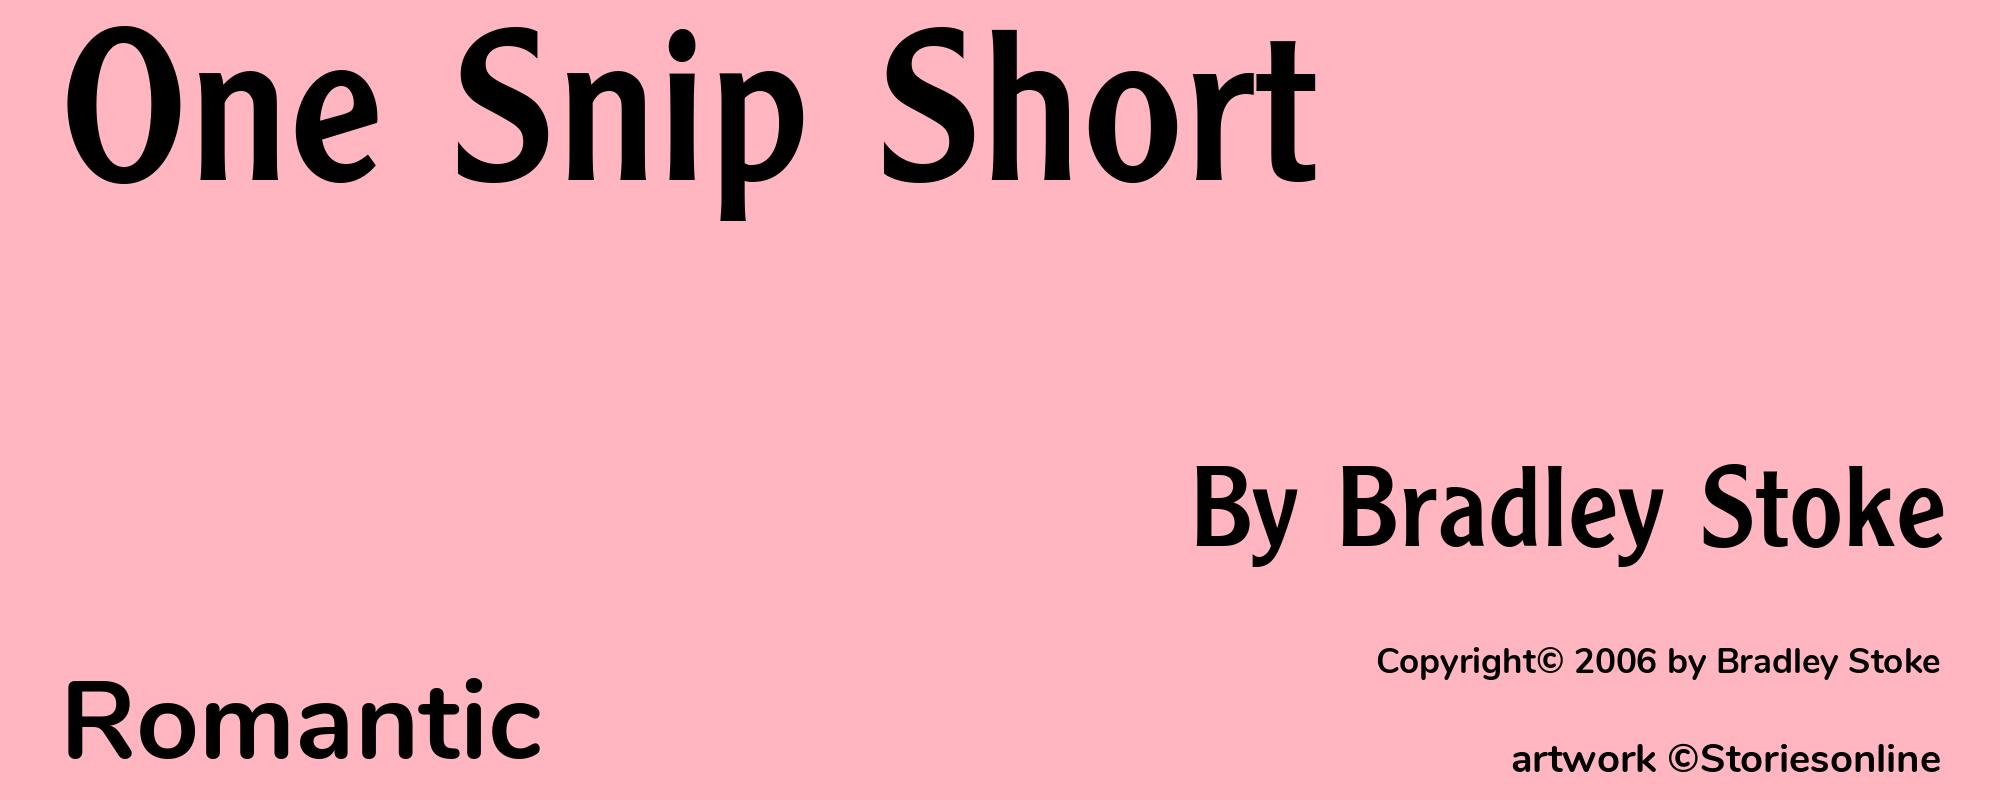 One Snip Short - Cover